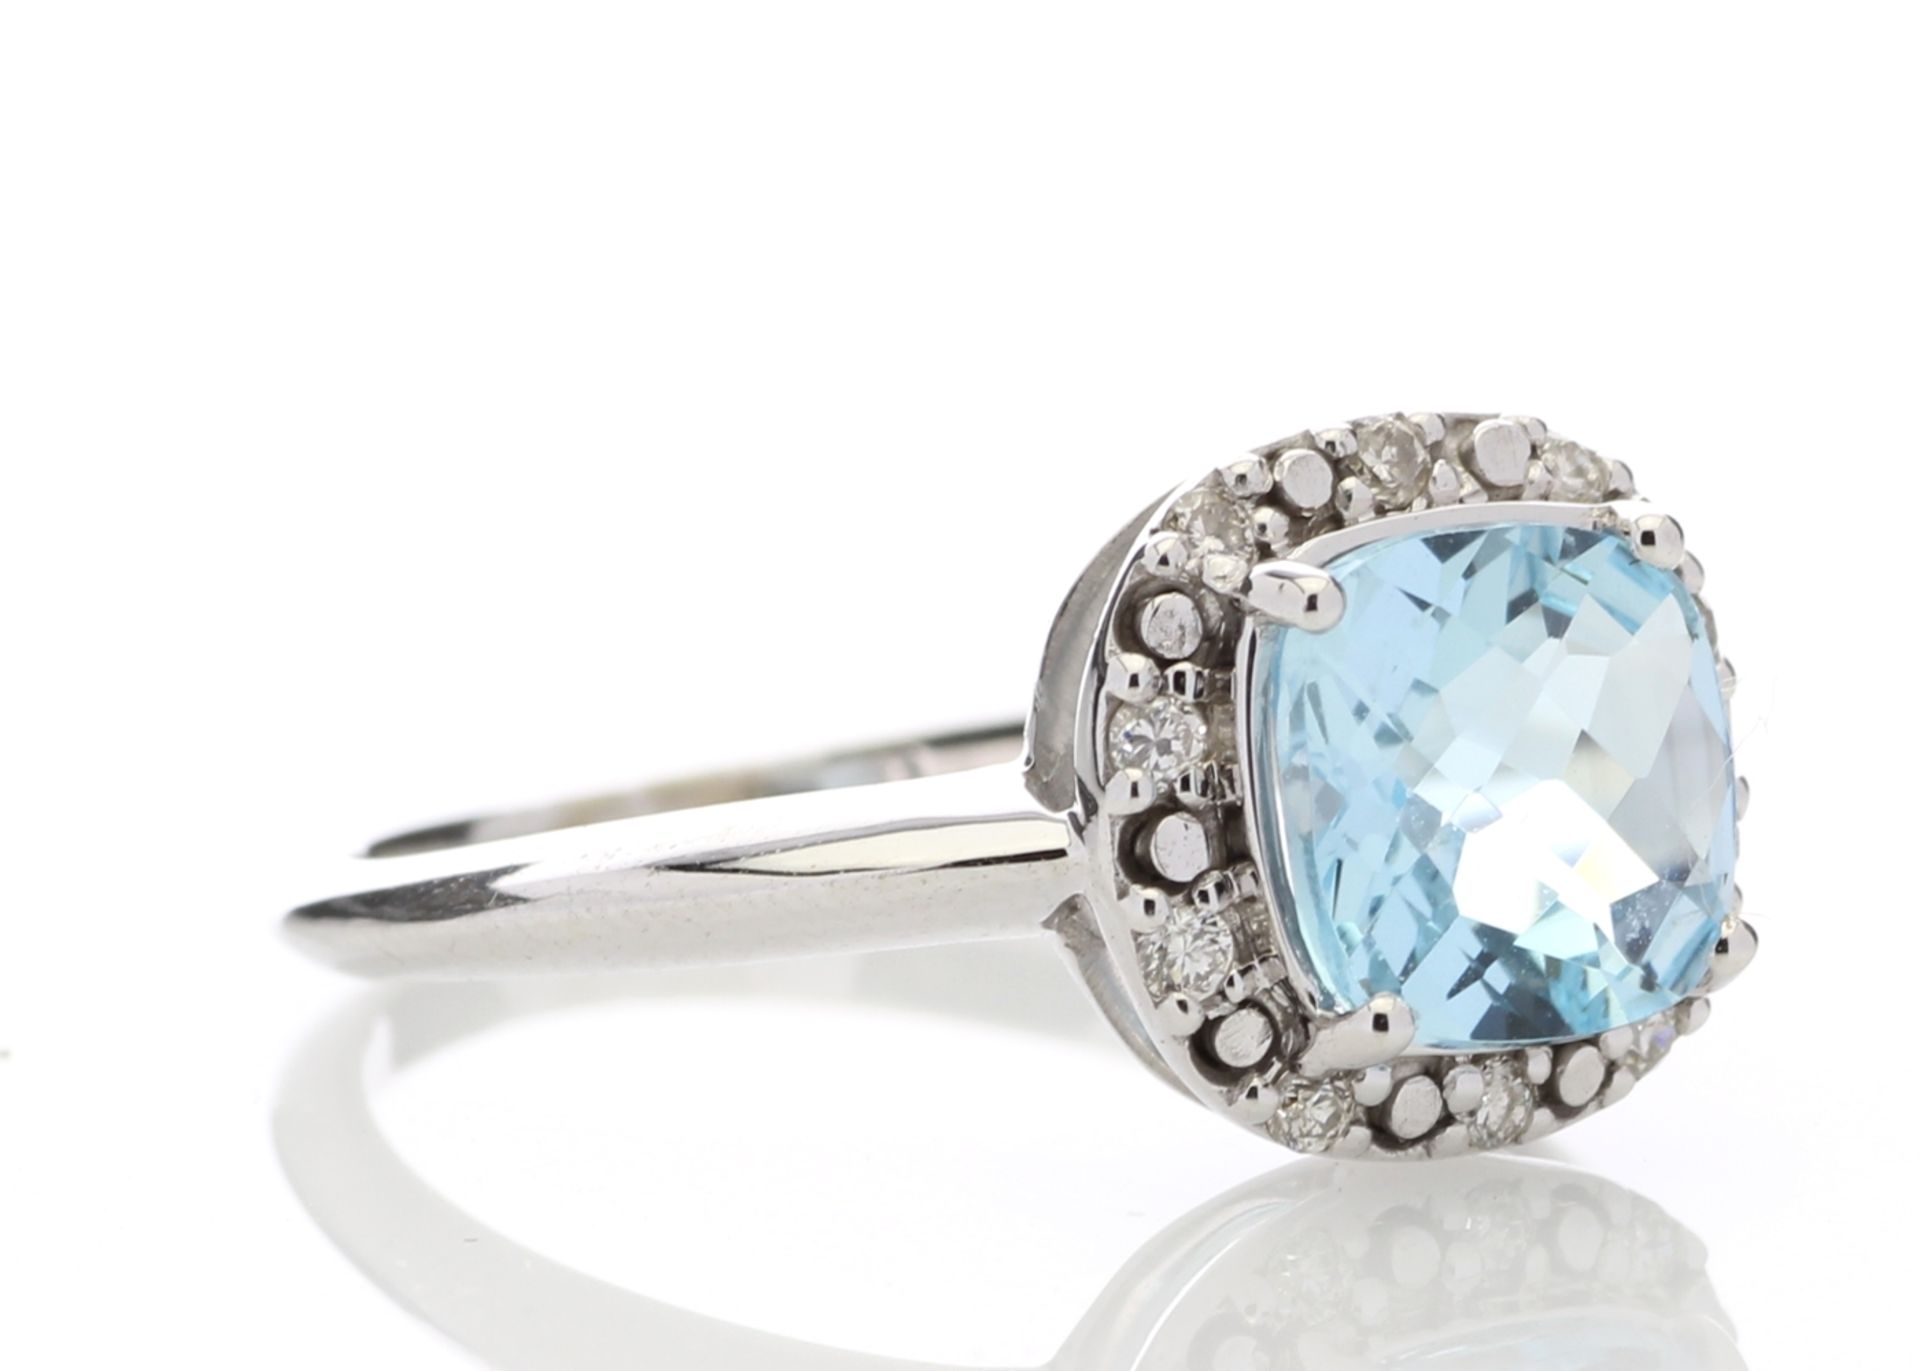 9ct White Gold Diamond And Blue Topaz Ring 0.10 Carats - Valued by GIE £1,920.00 - 9ct White Gold - Image 4 of 9